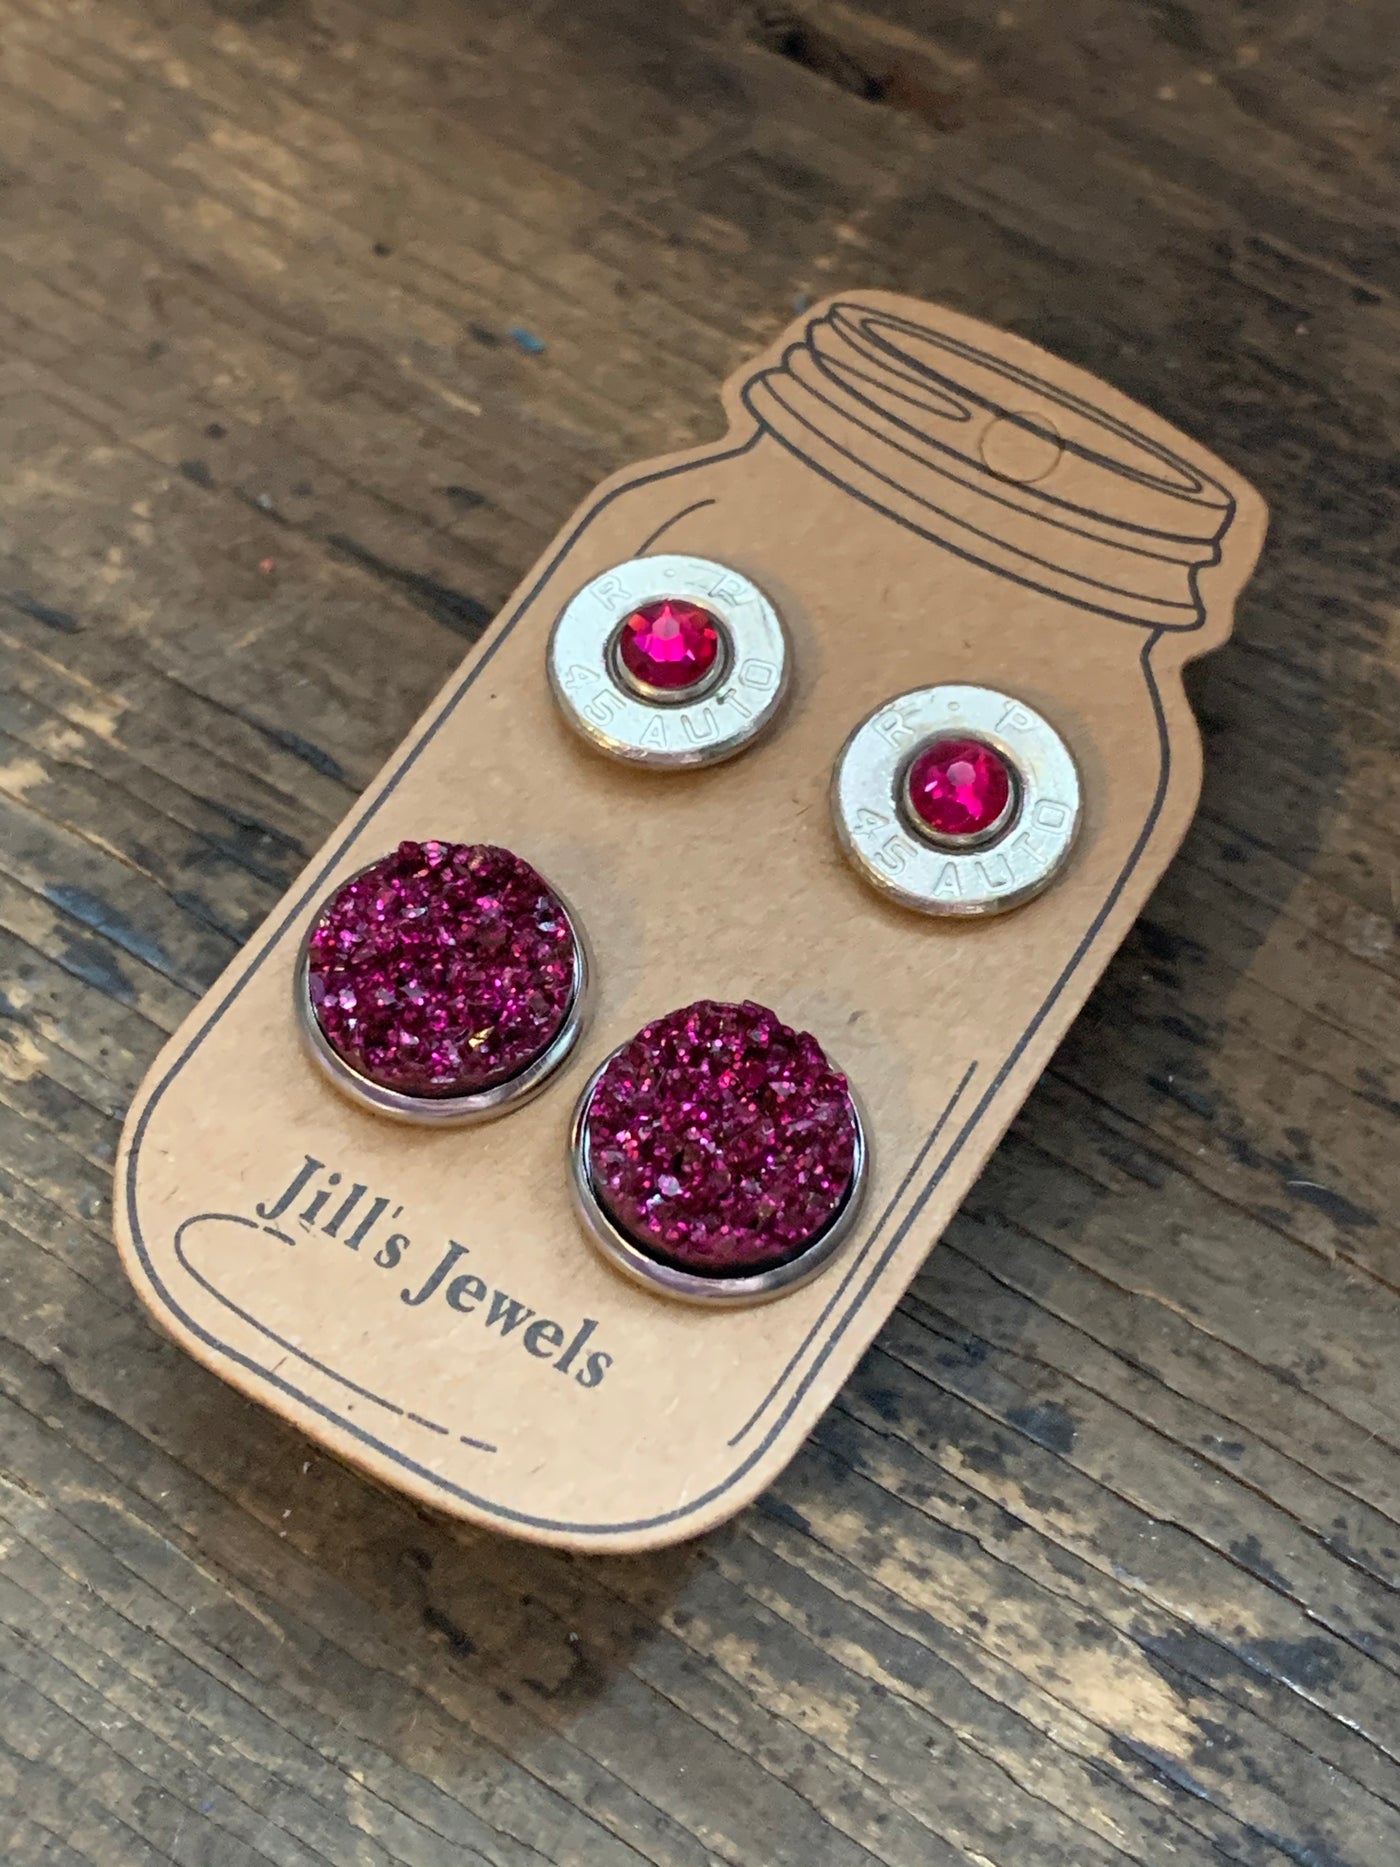 Ruby Red 45 Auto bullet earring set - Jill's Jewels | Unique, Handcrafted, Trendy, And Fun Jewelry